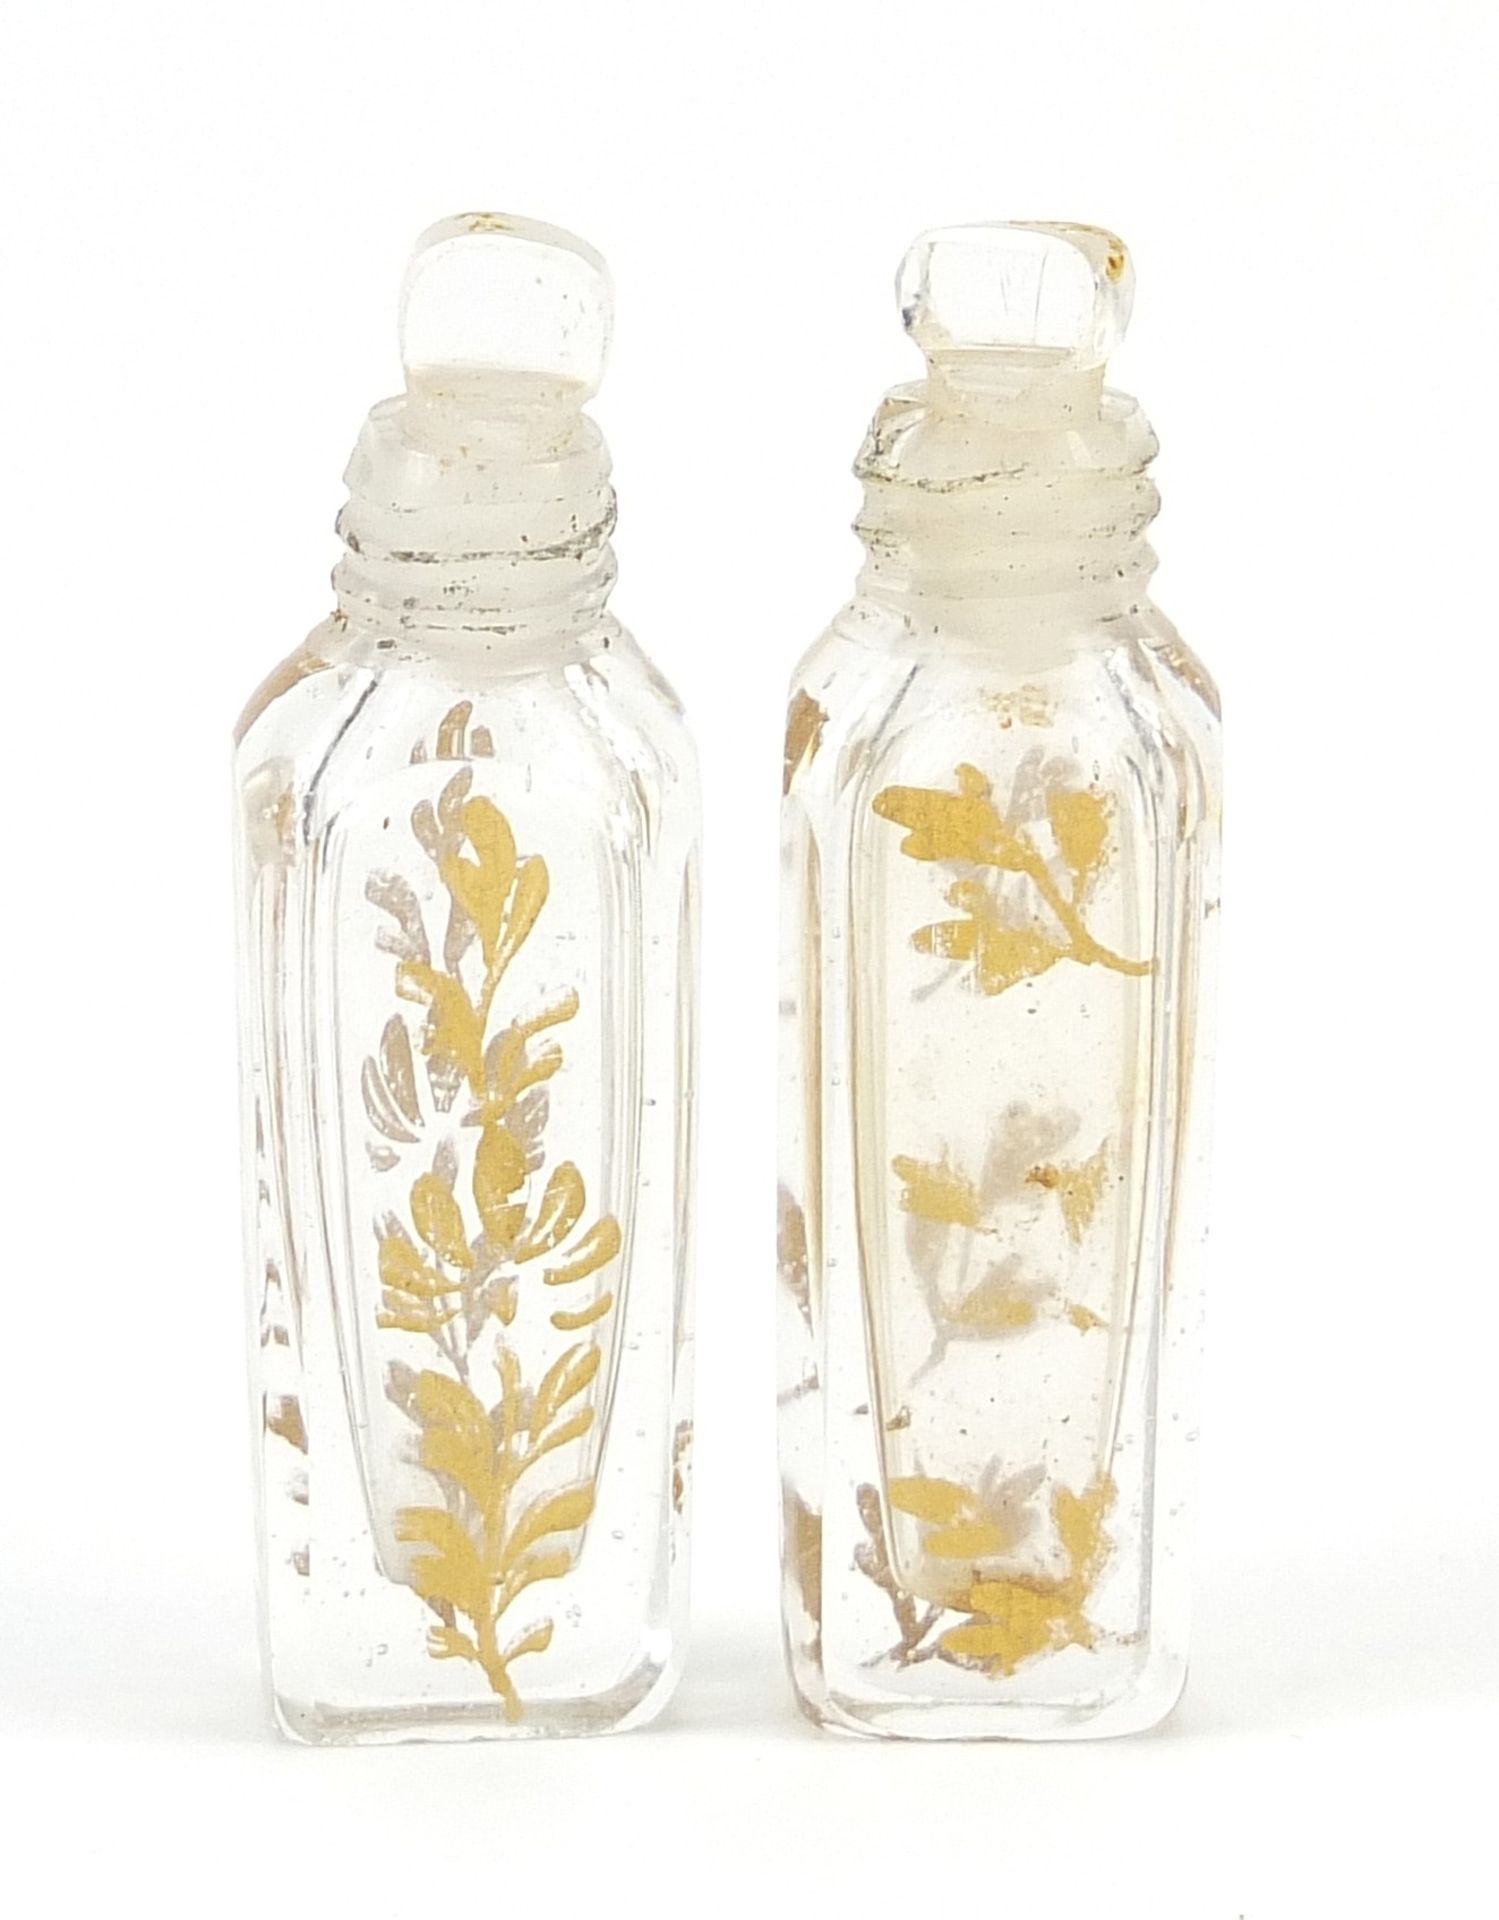 18th century tortoiseshell and silver piquet work scent bottle etui housing two glass scent - Image 2 of 5